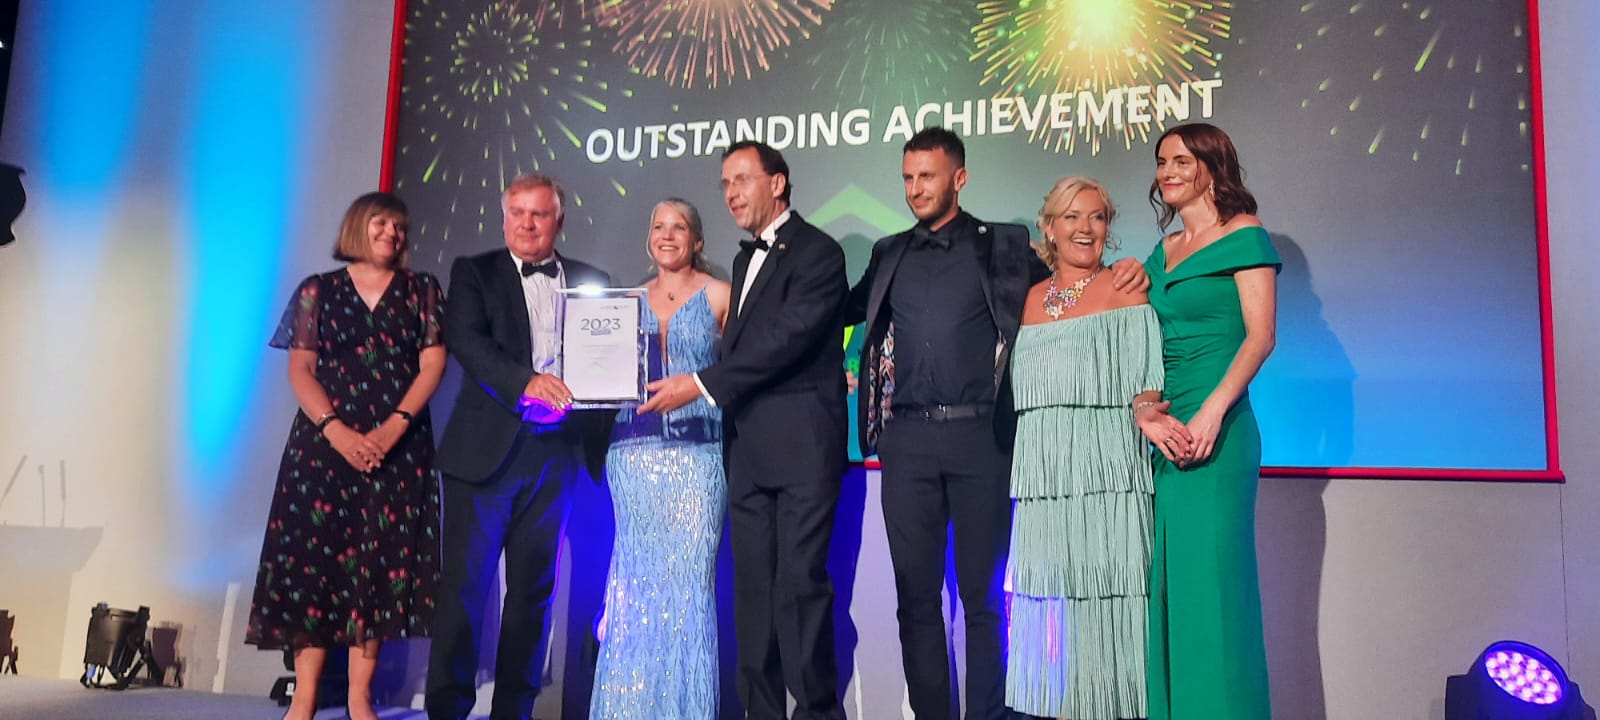 Cyfle Building Skills wins Outstanding Achievement Award at CEW Awards 2023